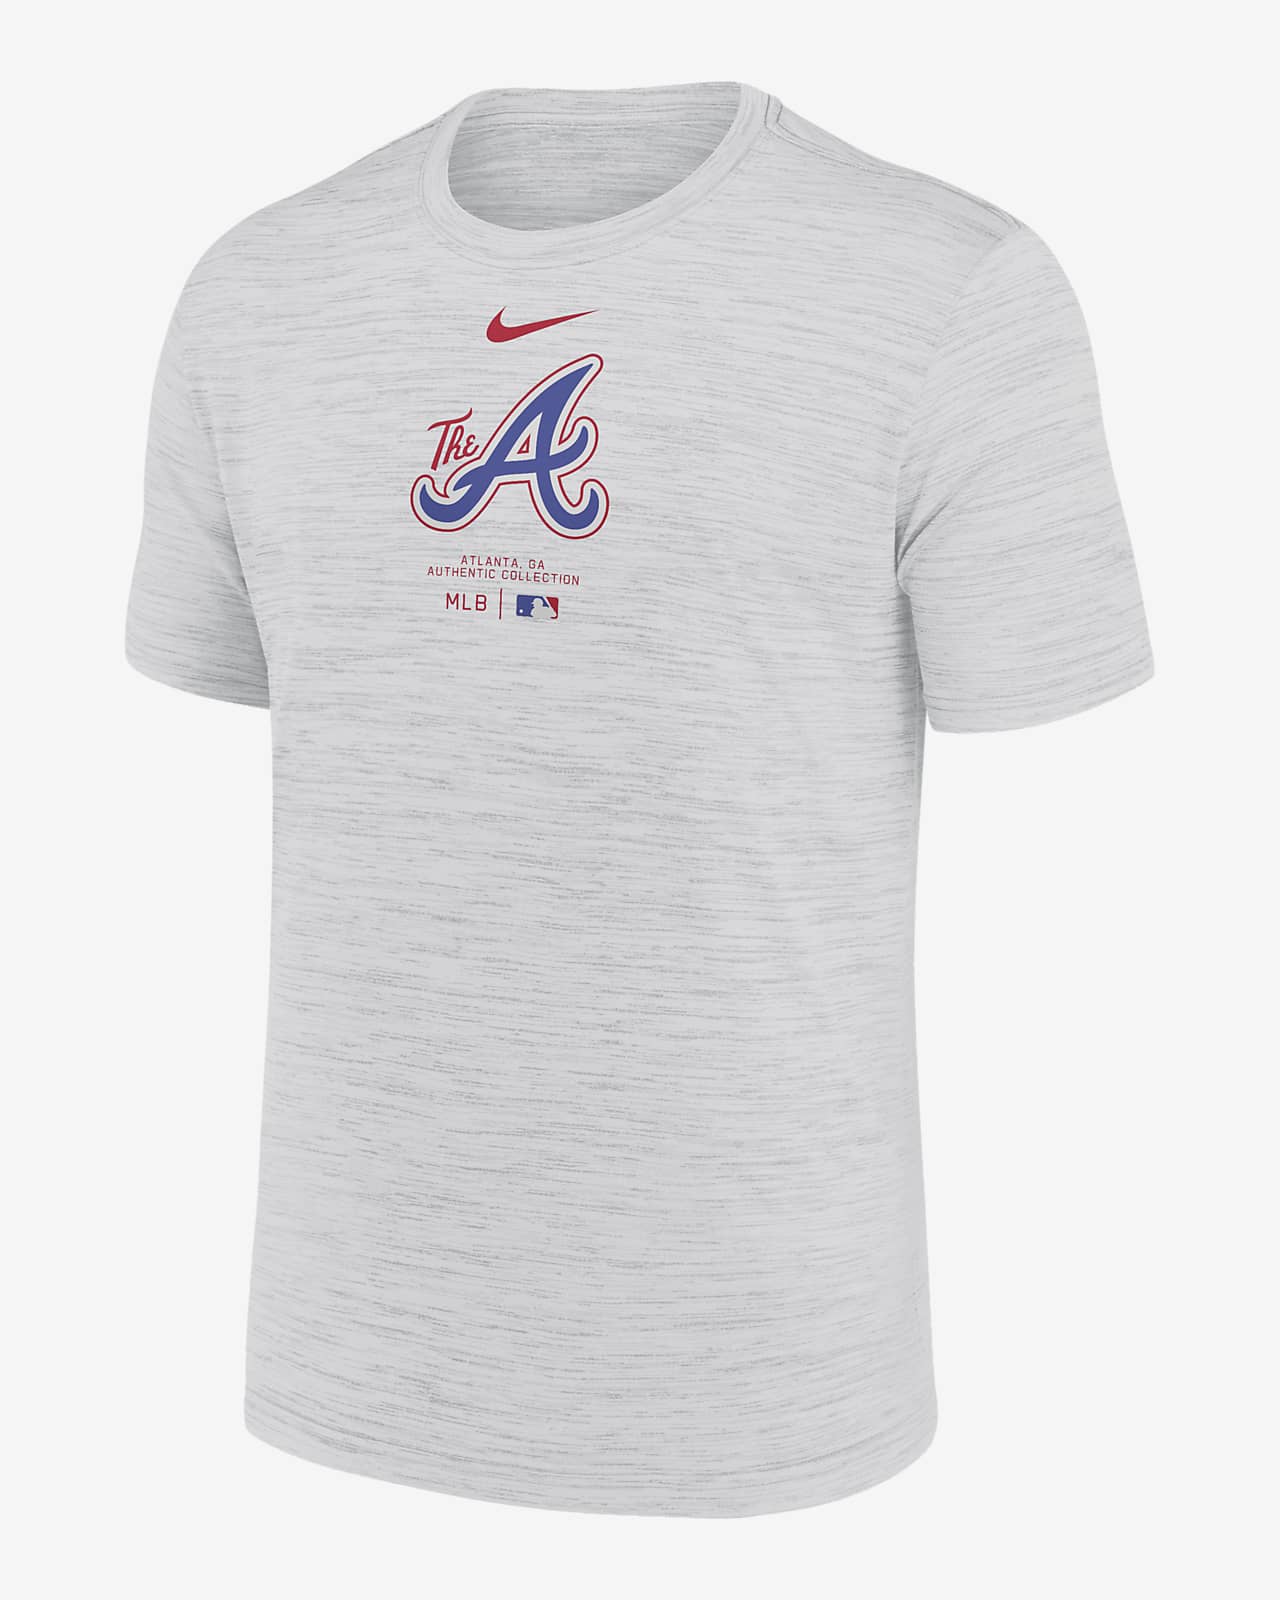 https://static.nike.com/a/images/t_PDP_1280_v1/f_auto,q_auto:eco/174c1663-23ac-466d-98c4-f9faa3f98c7f/atlanta-braves-city-connect-practice-velocity-mens-dri-fit-t-shirt-qCL8XD.png